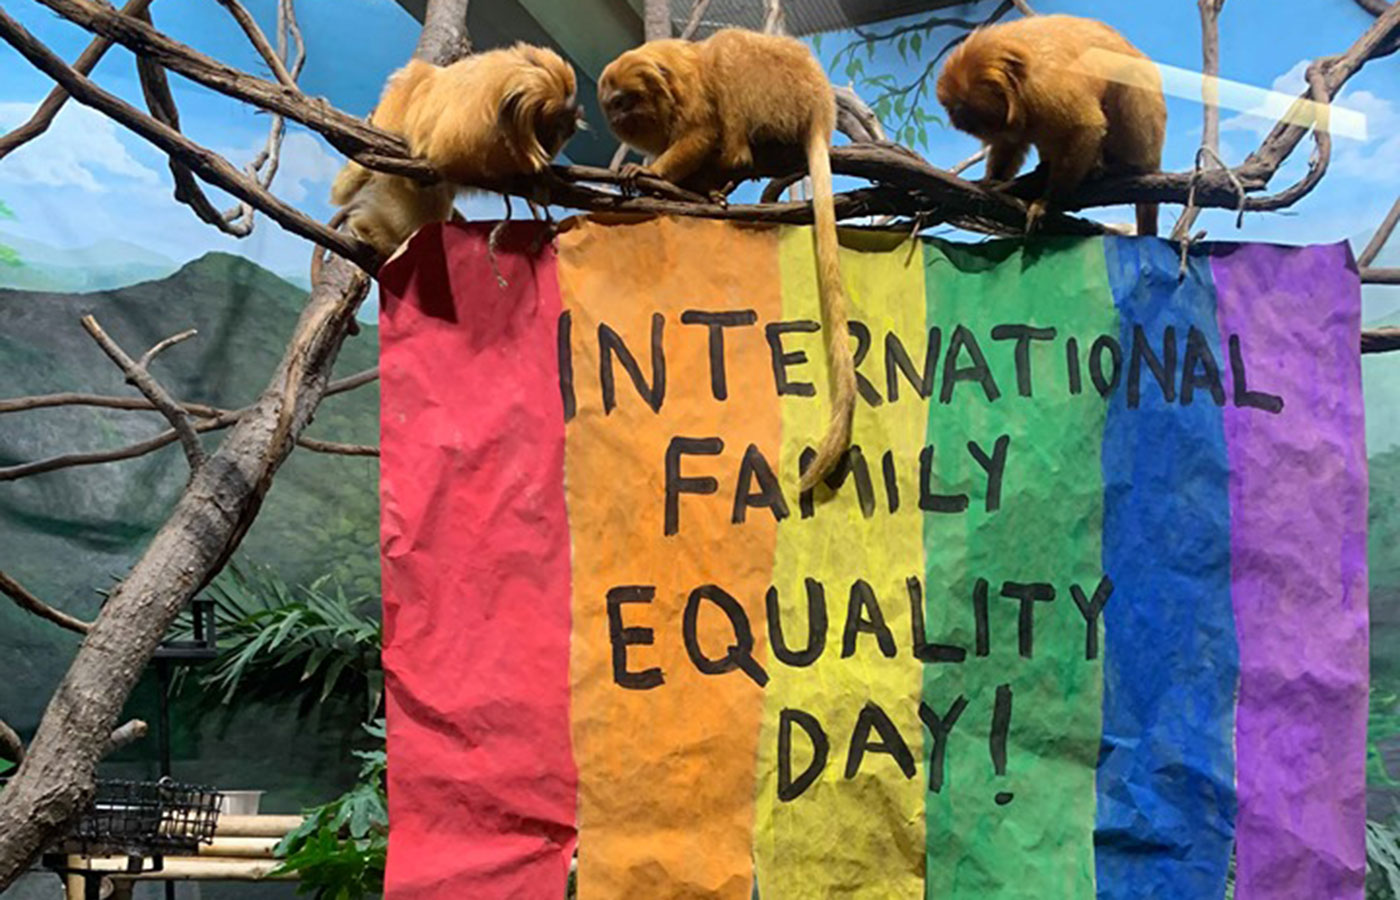 Three golden lion tamarins perched on a tree branch above a rainbow sign that says "International Family Equality Day!"